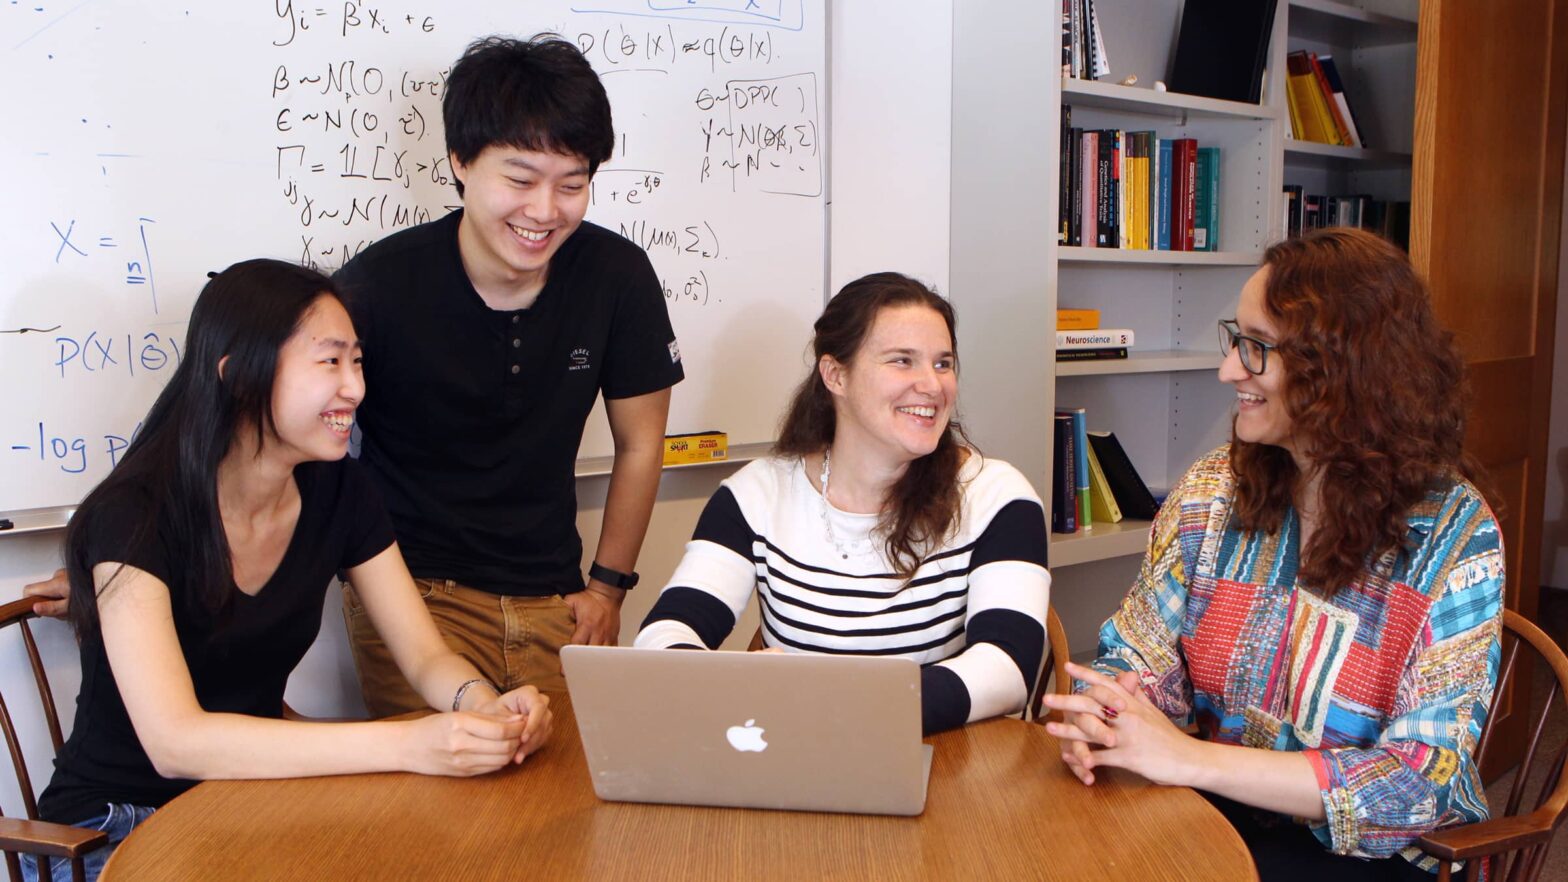 Barbara Engelhardt with students, crowding around computer, with whiteboard as a backdrop.